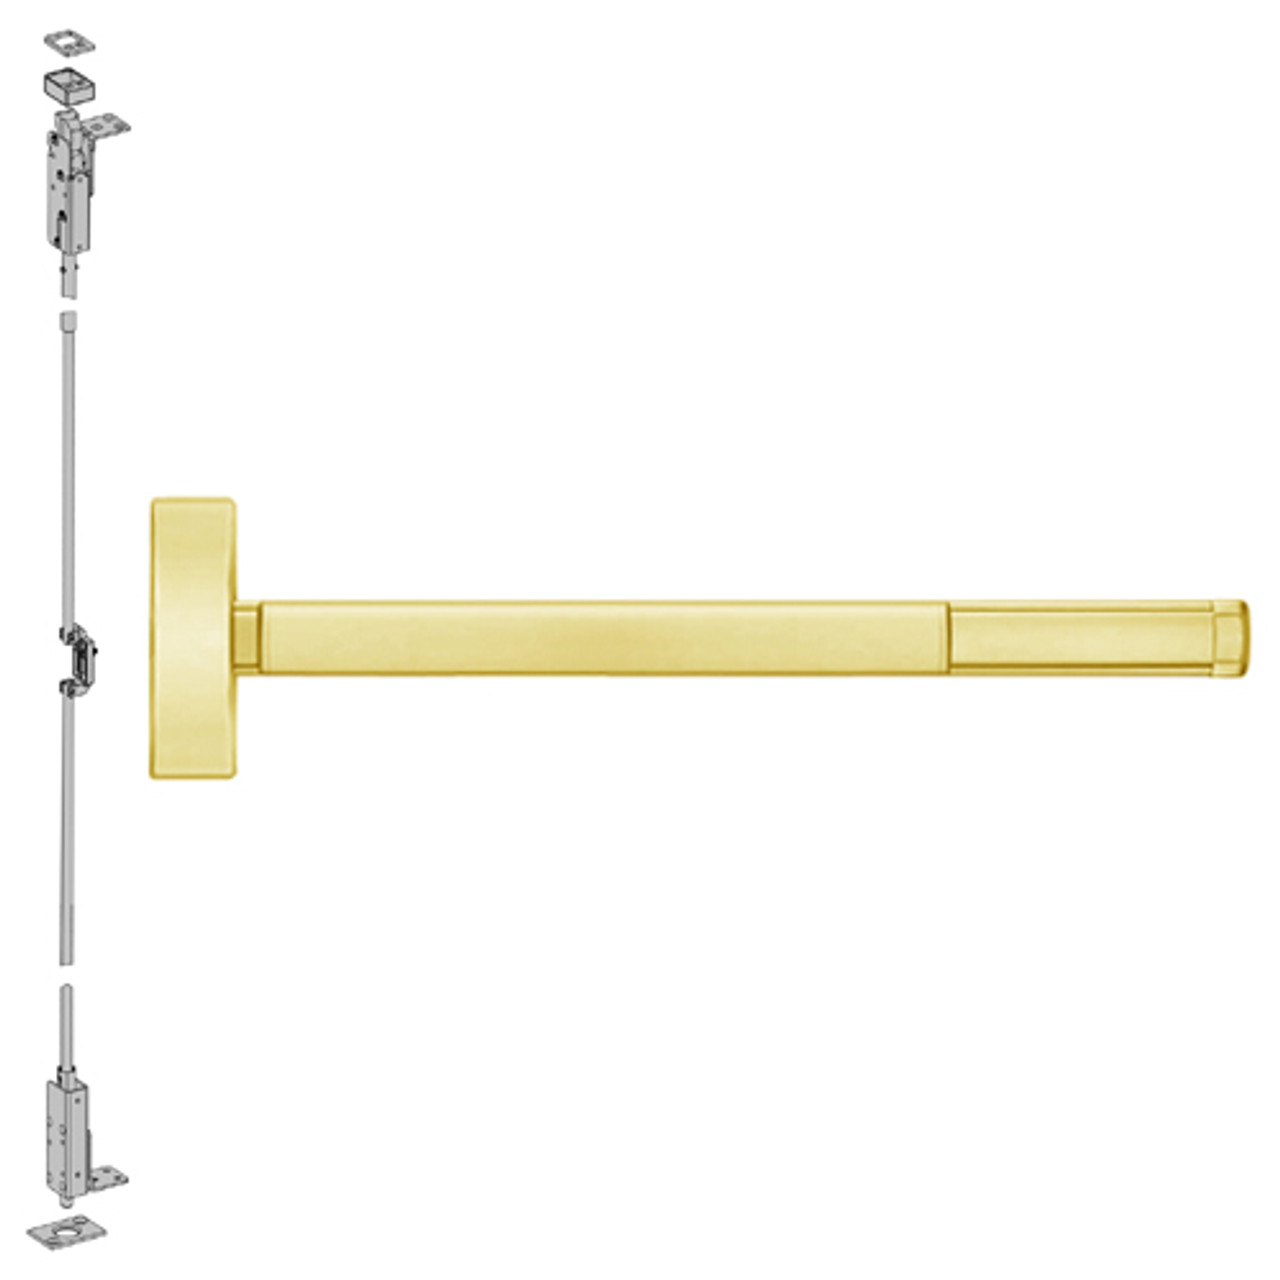 DEFL2703-605-36 PHI 2700 Series Fire Rated Wood Door Concealed Vertical Exit Device with Delayed Egress Prepped for Key Retracts Latchbolt in Bright Brass Finish